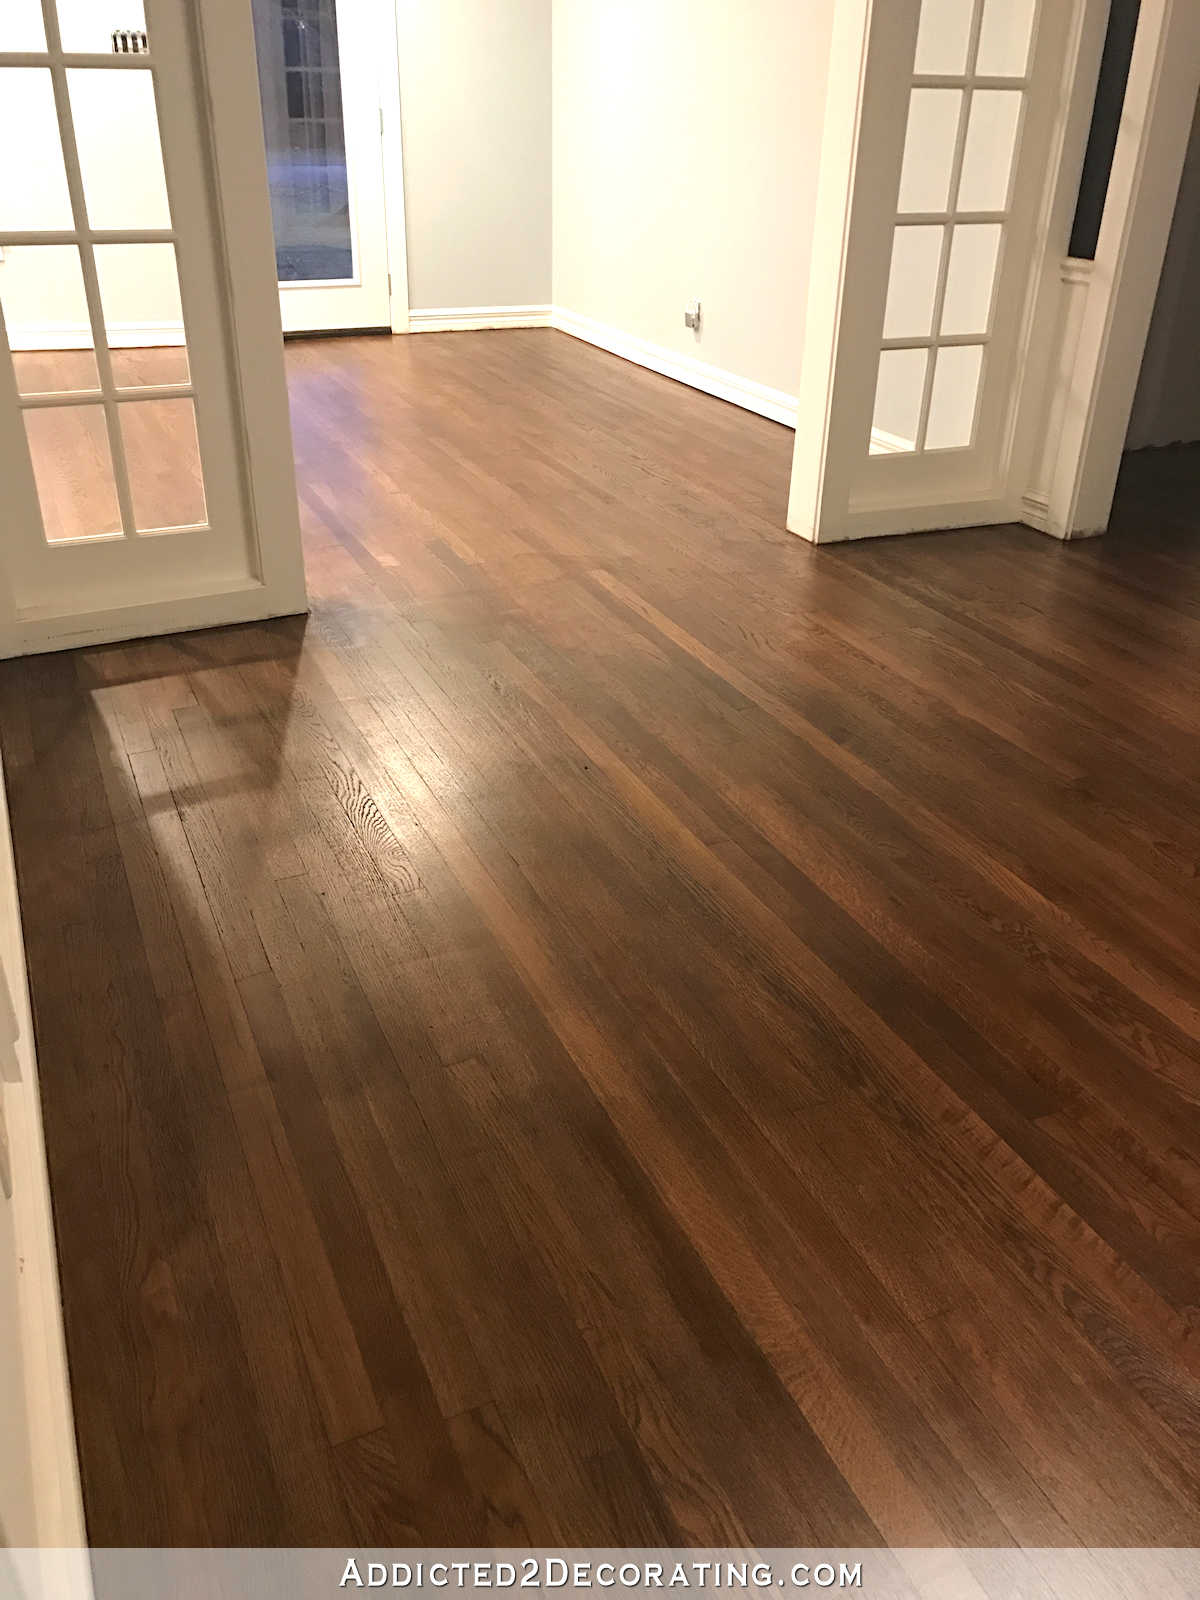 refinishing red oak hardwood floors - adding stain to first coat of polyurethane to darken the color - music room and entryway